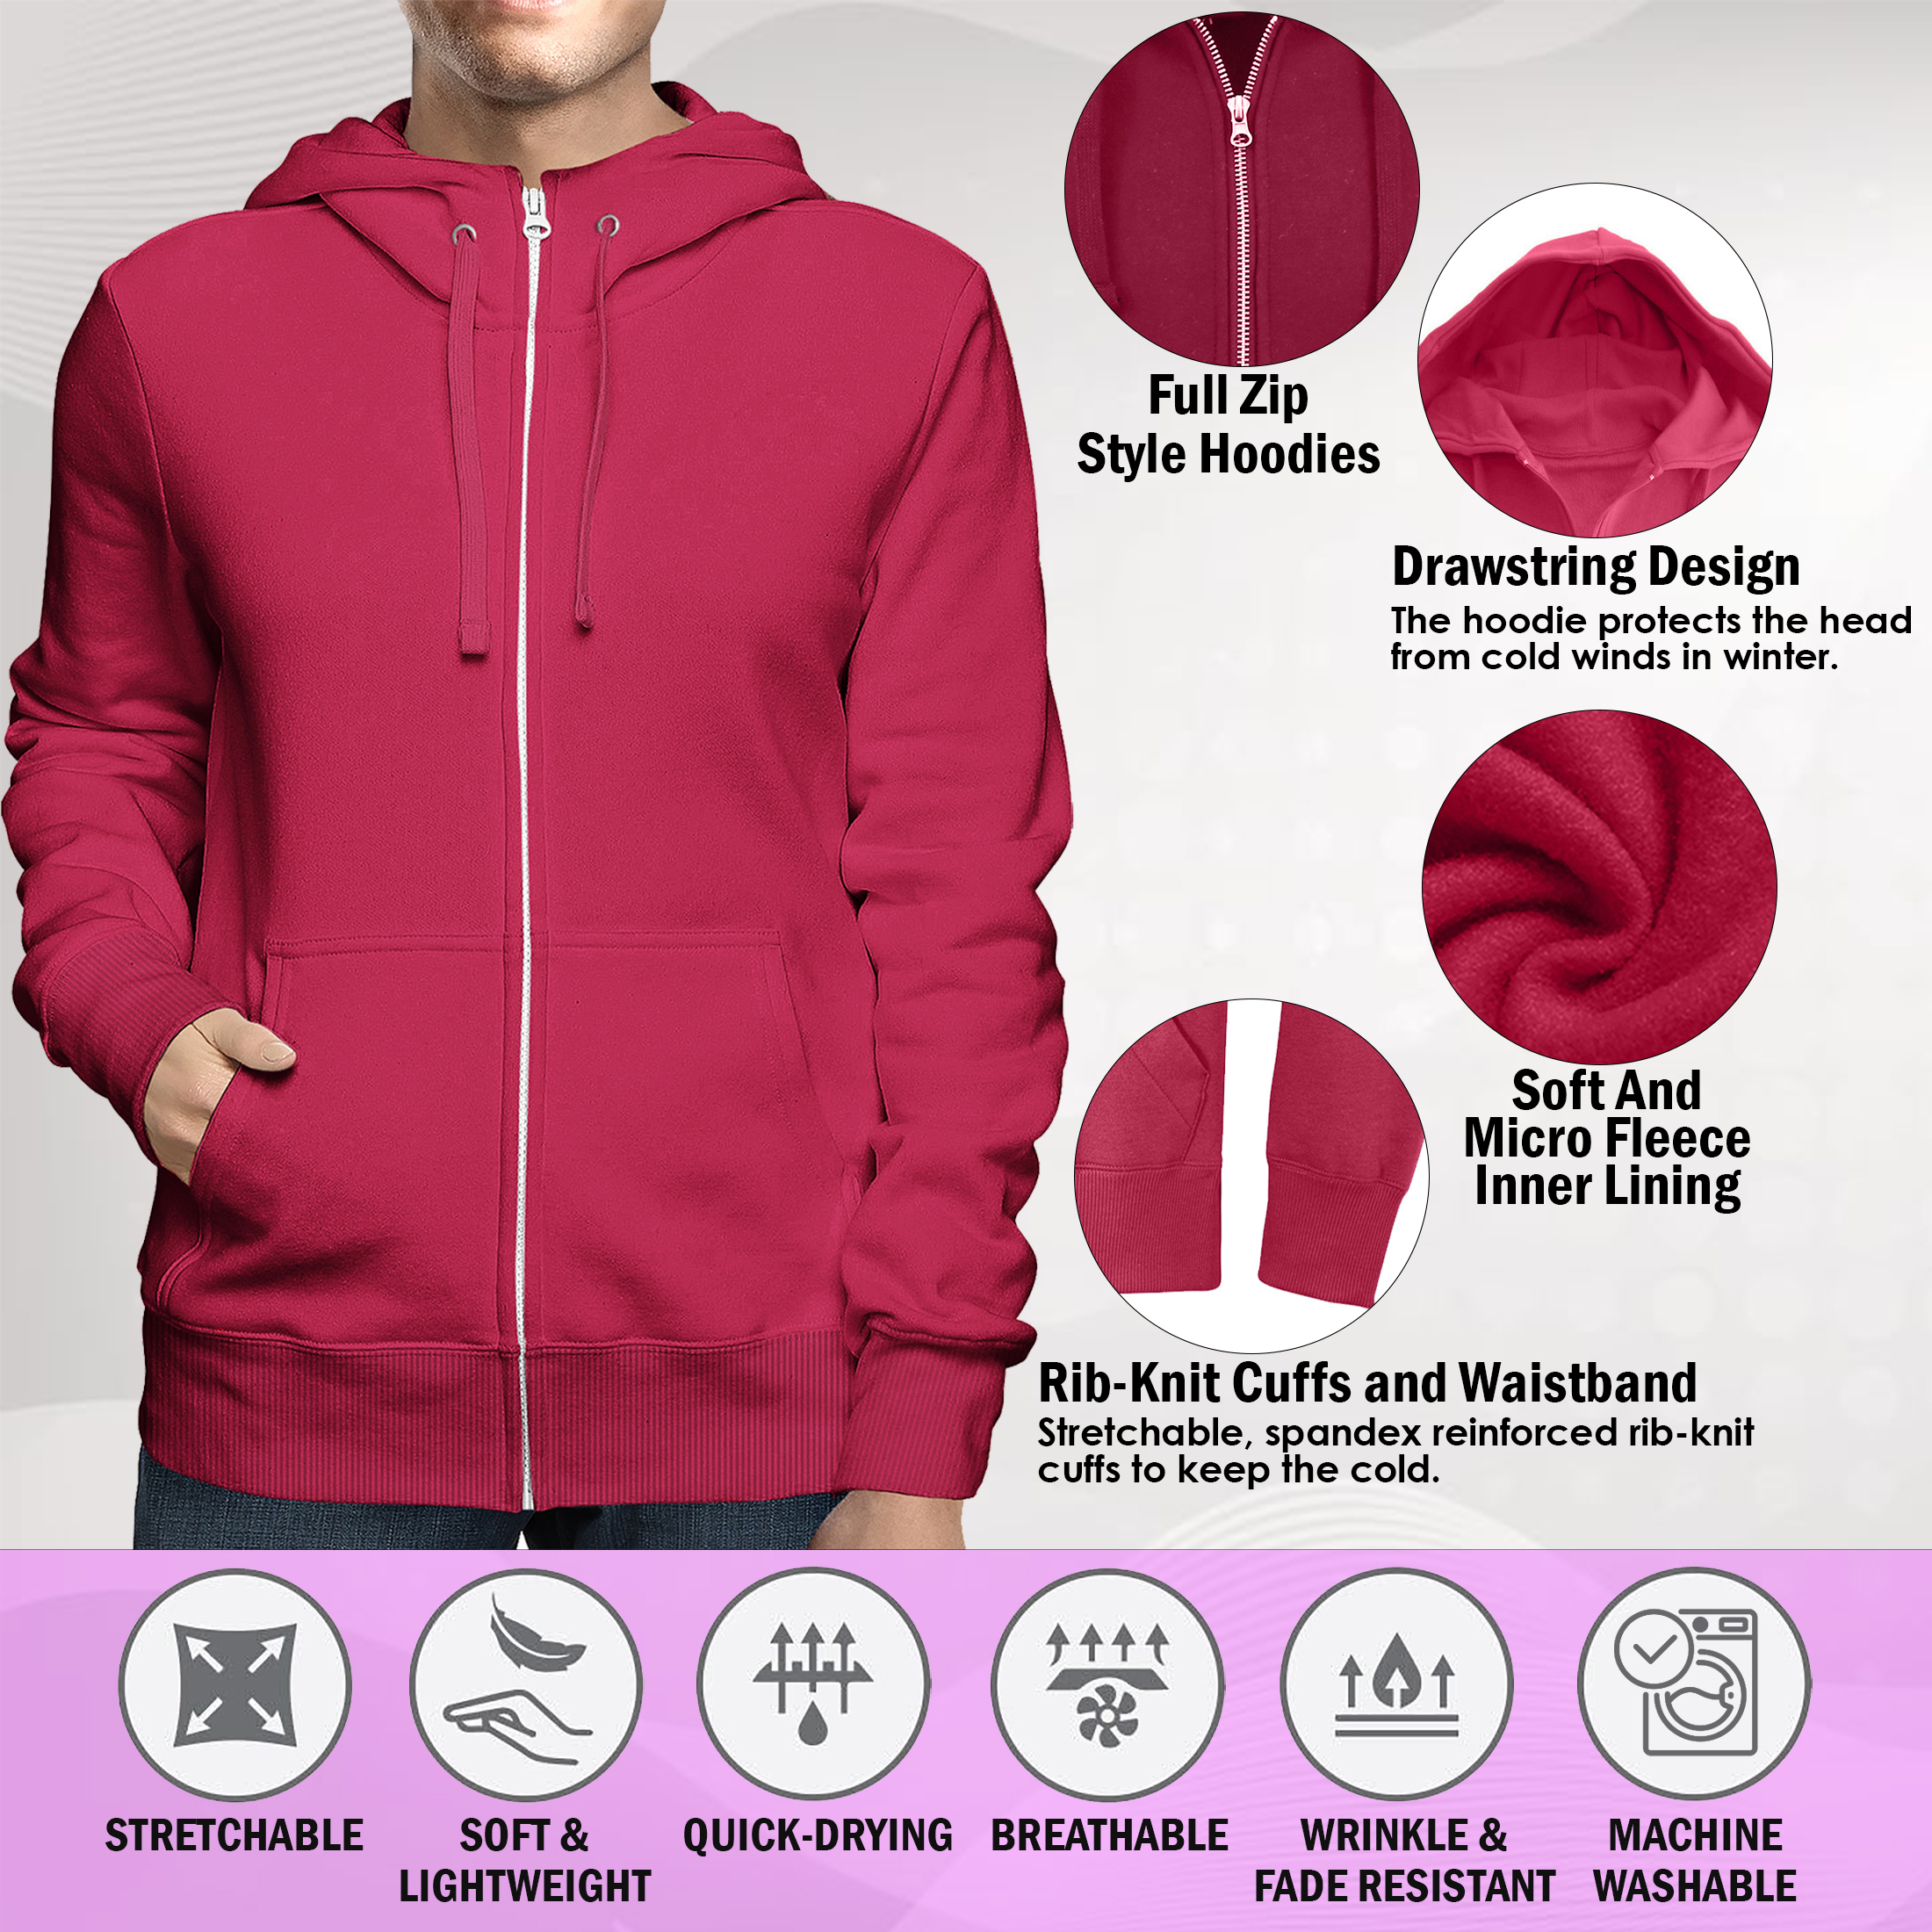 2-Pack: Men's Full Zip Up Fleece-Lined Hoodie Sweatshirt (Big & Tall Size Available) - Burgundy & Timberland, Small